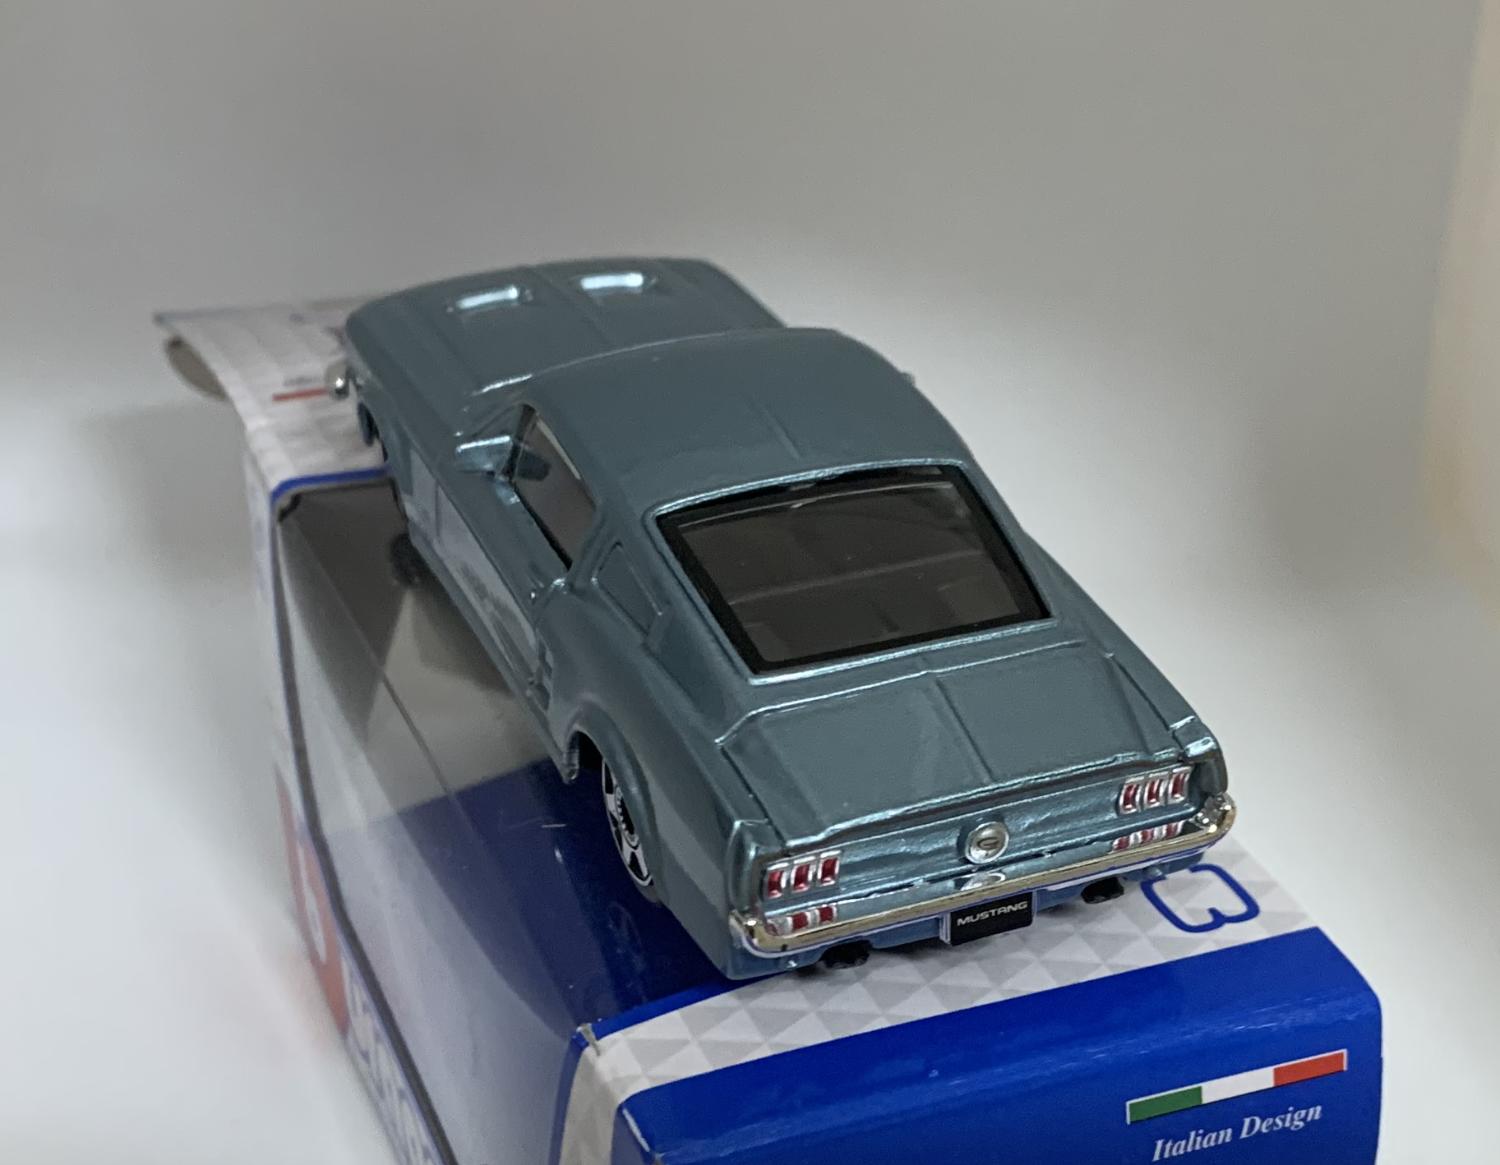 Ford Mustang GT 1964 in metallic blue 1:43 scale model from Bburago, streetfire